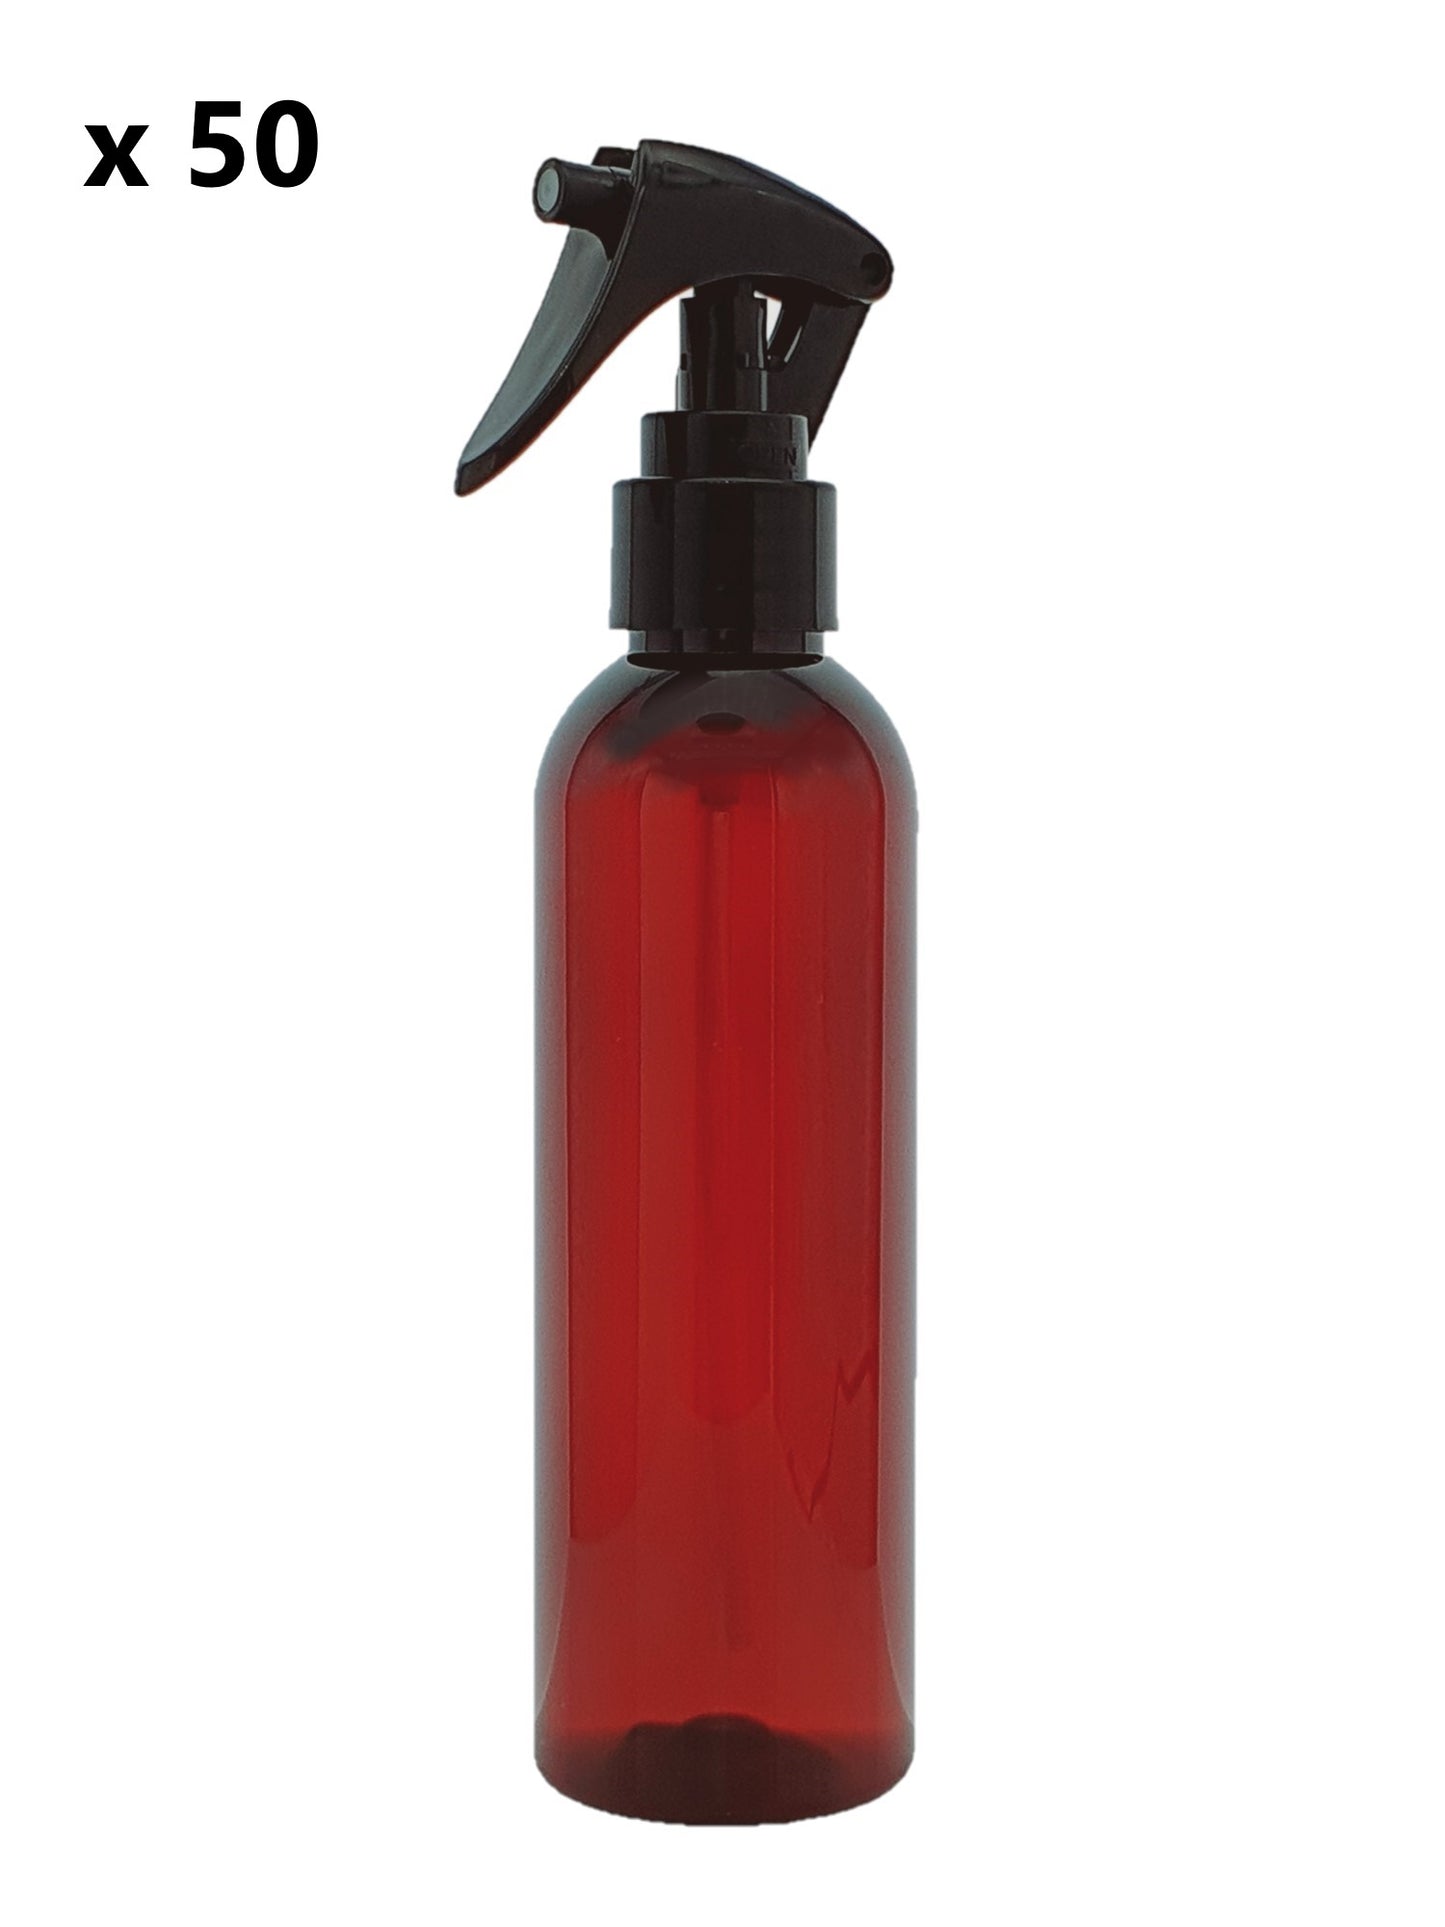 200ml Tall Amber Plastic PET Bottle with 24mm 410 Black Trigger Spray